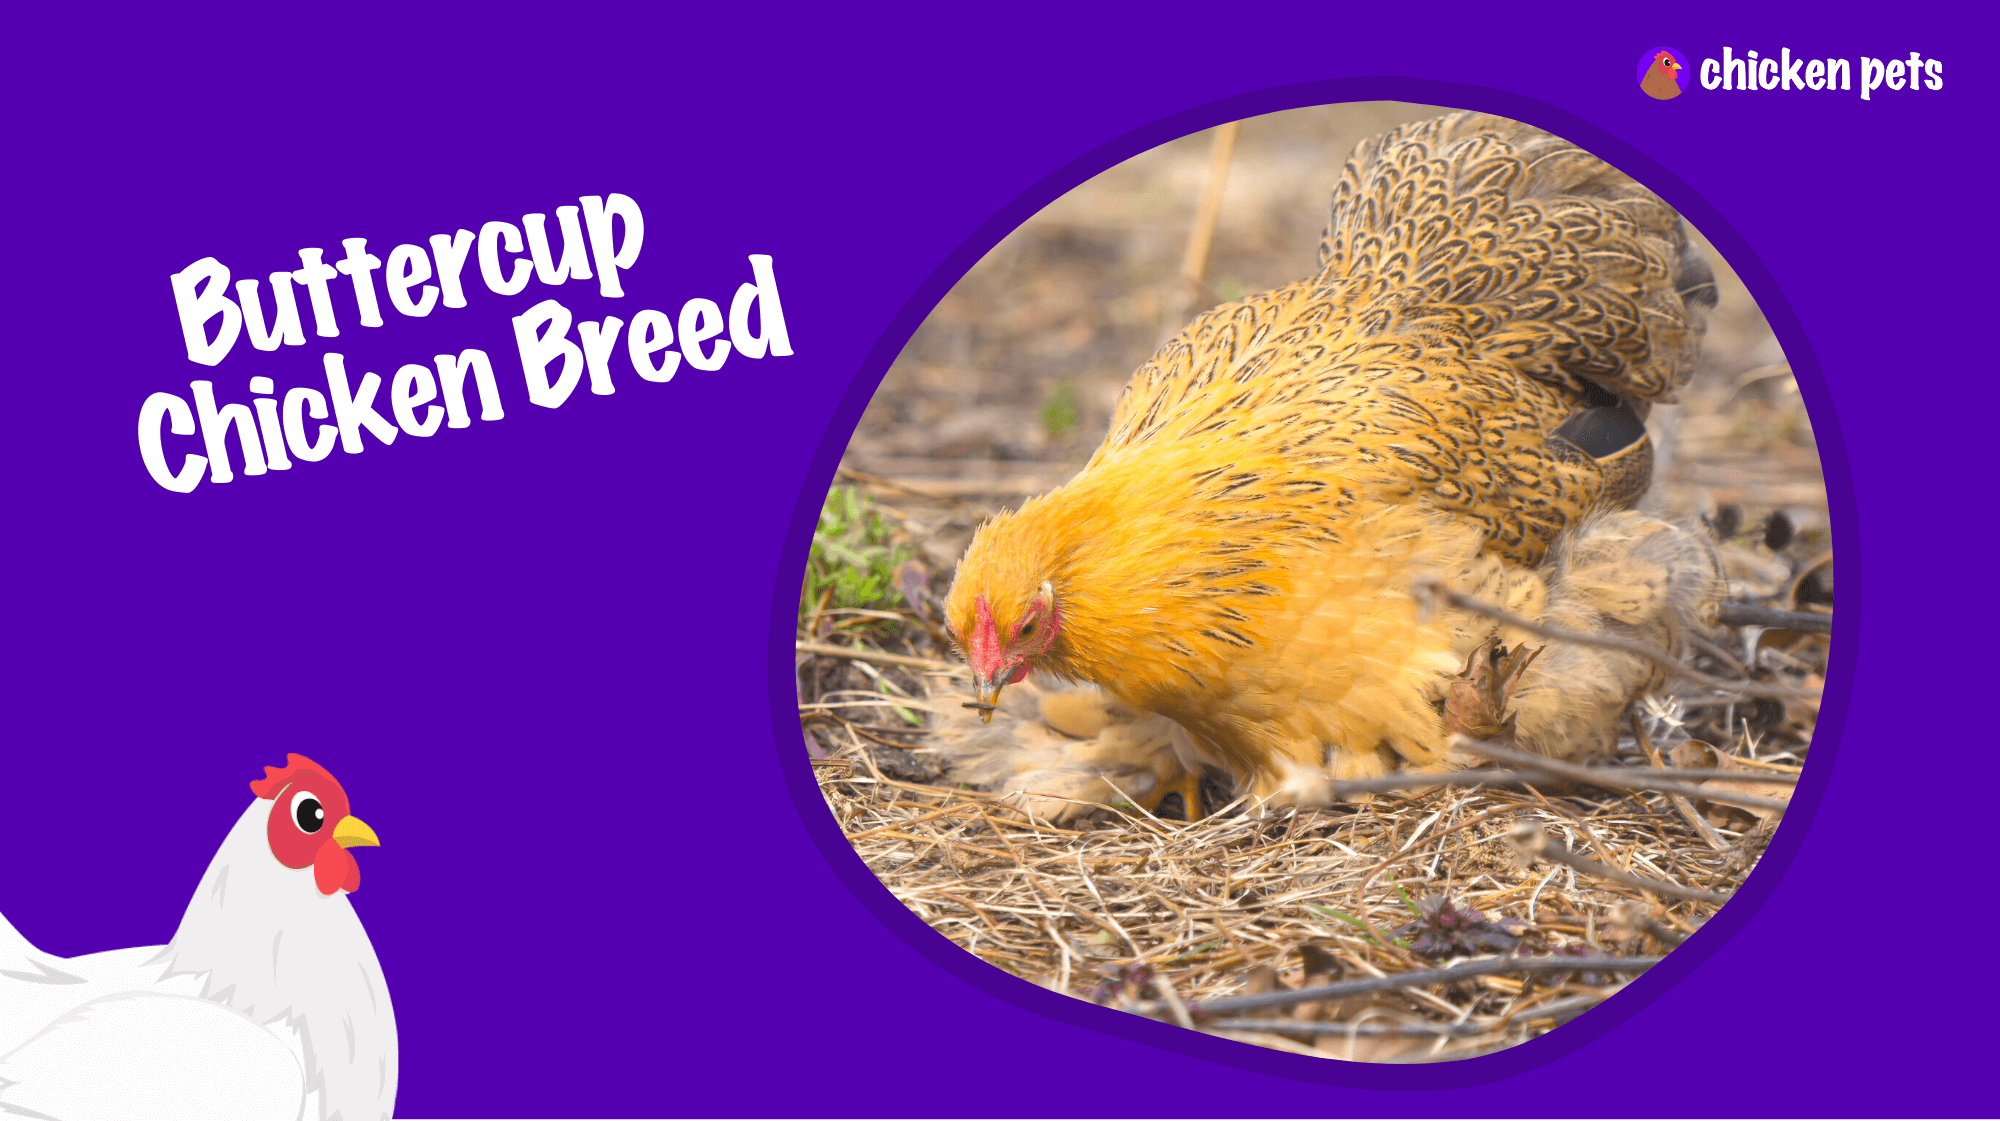 buttercup chicken breed